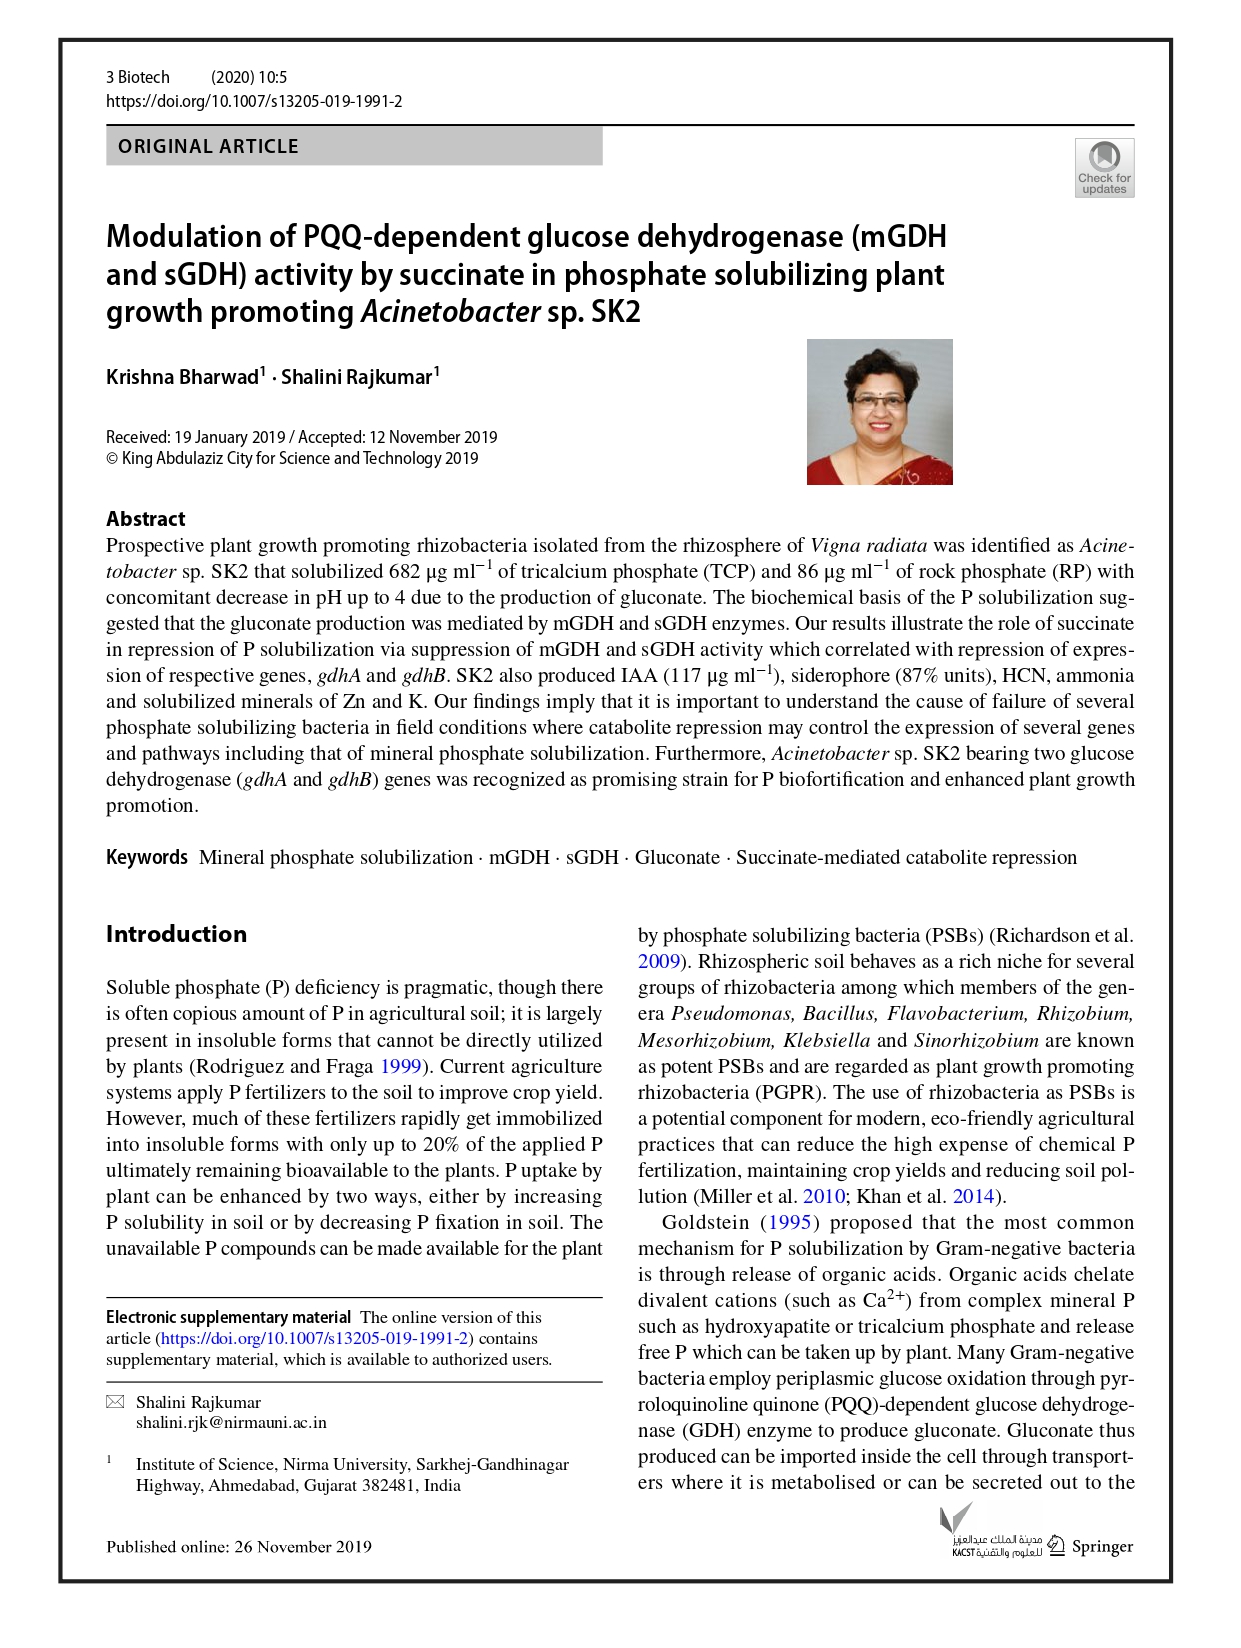 Modulation of PQQ-dependent glucose dehydrogenase (mGDH and sGDH) activity by succinate in phosphate solubilizing plant growth promoting Acinetobacter sp. SK2